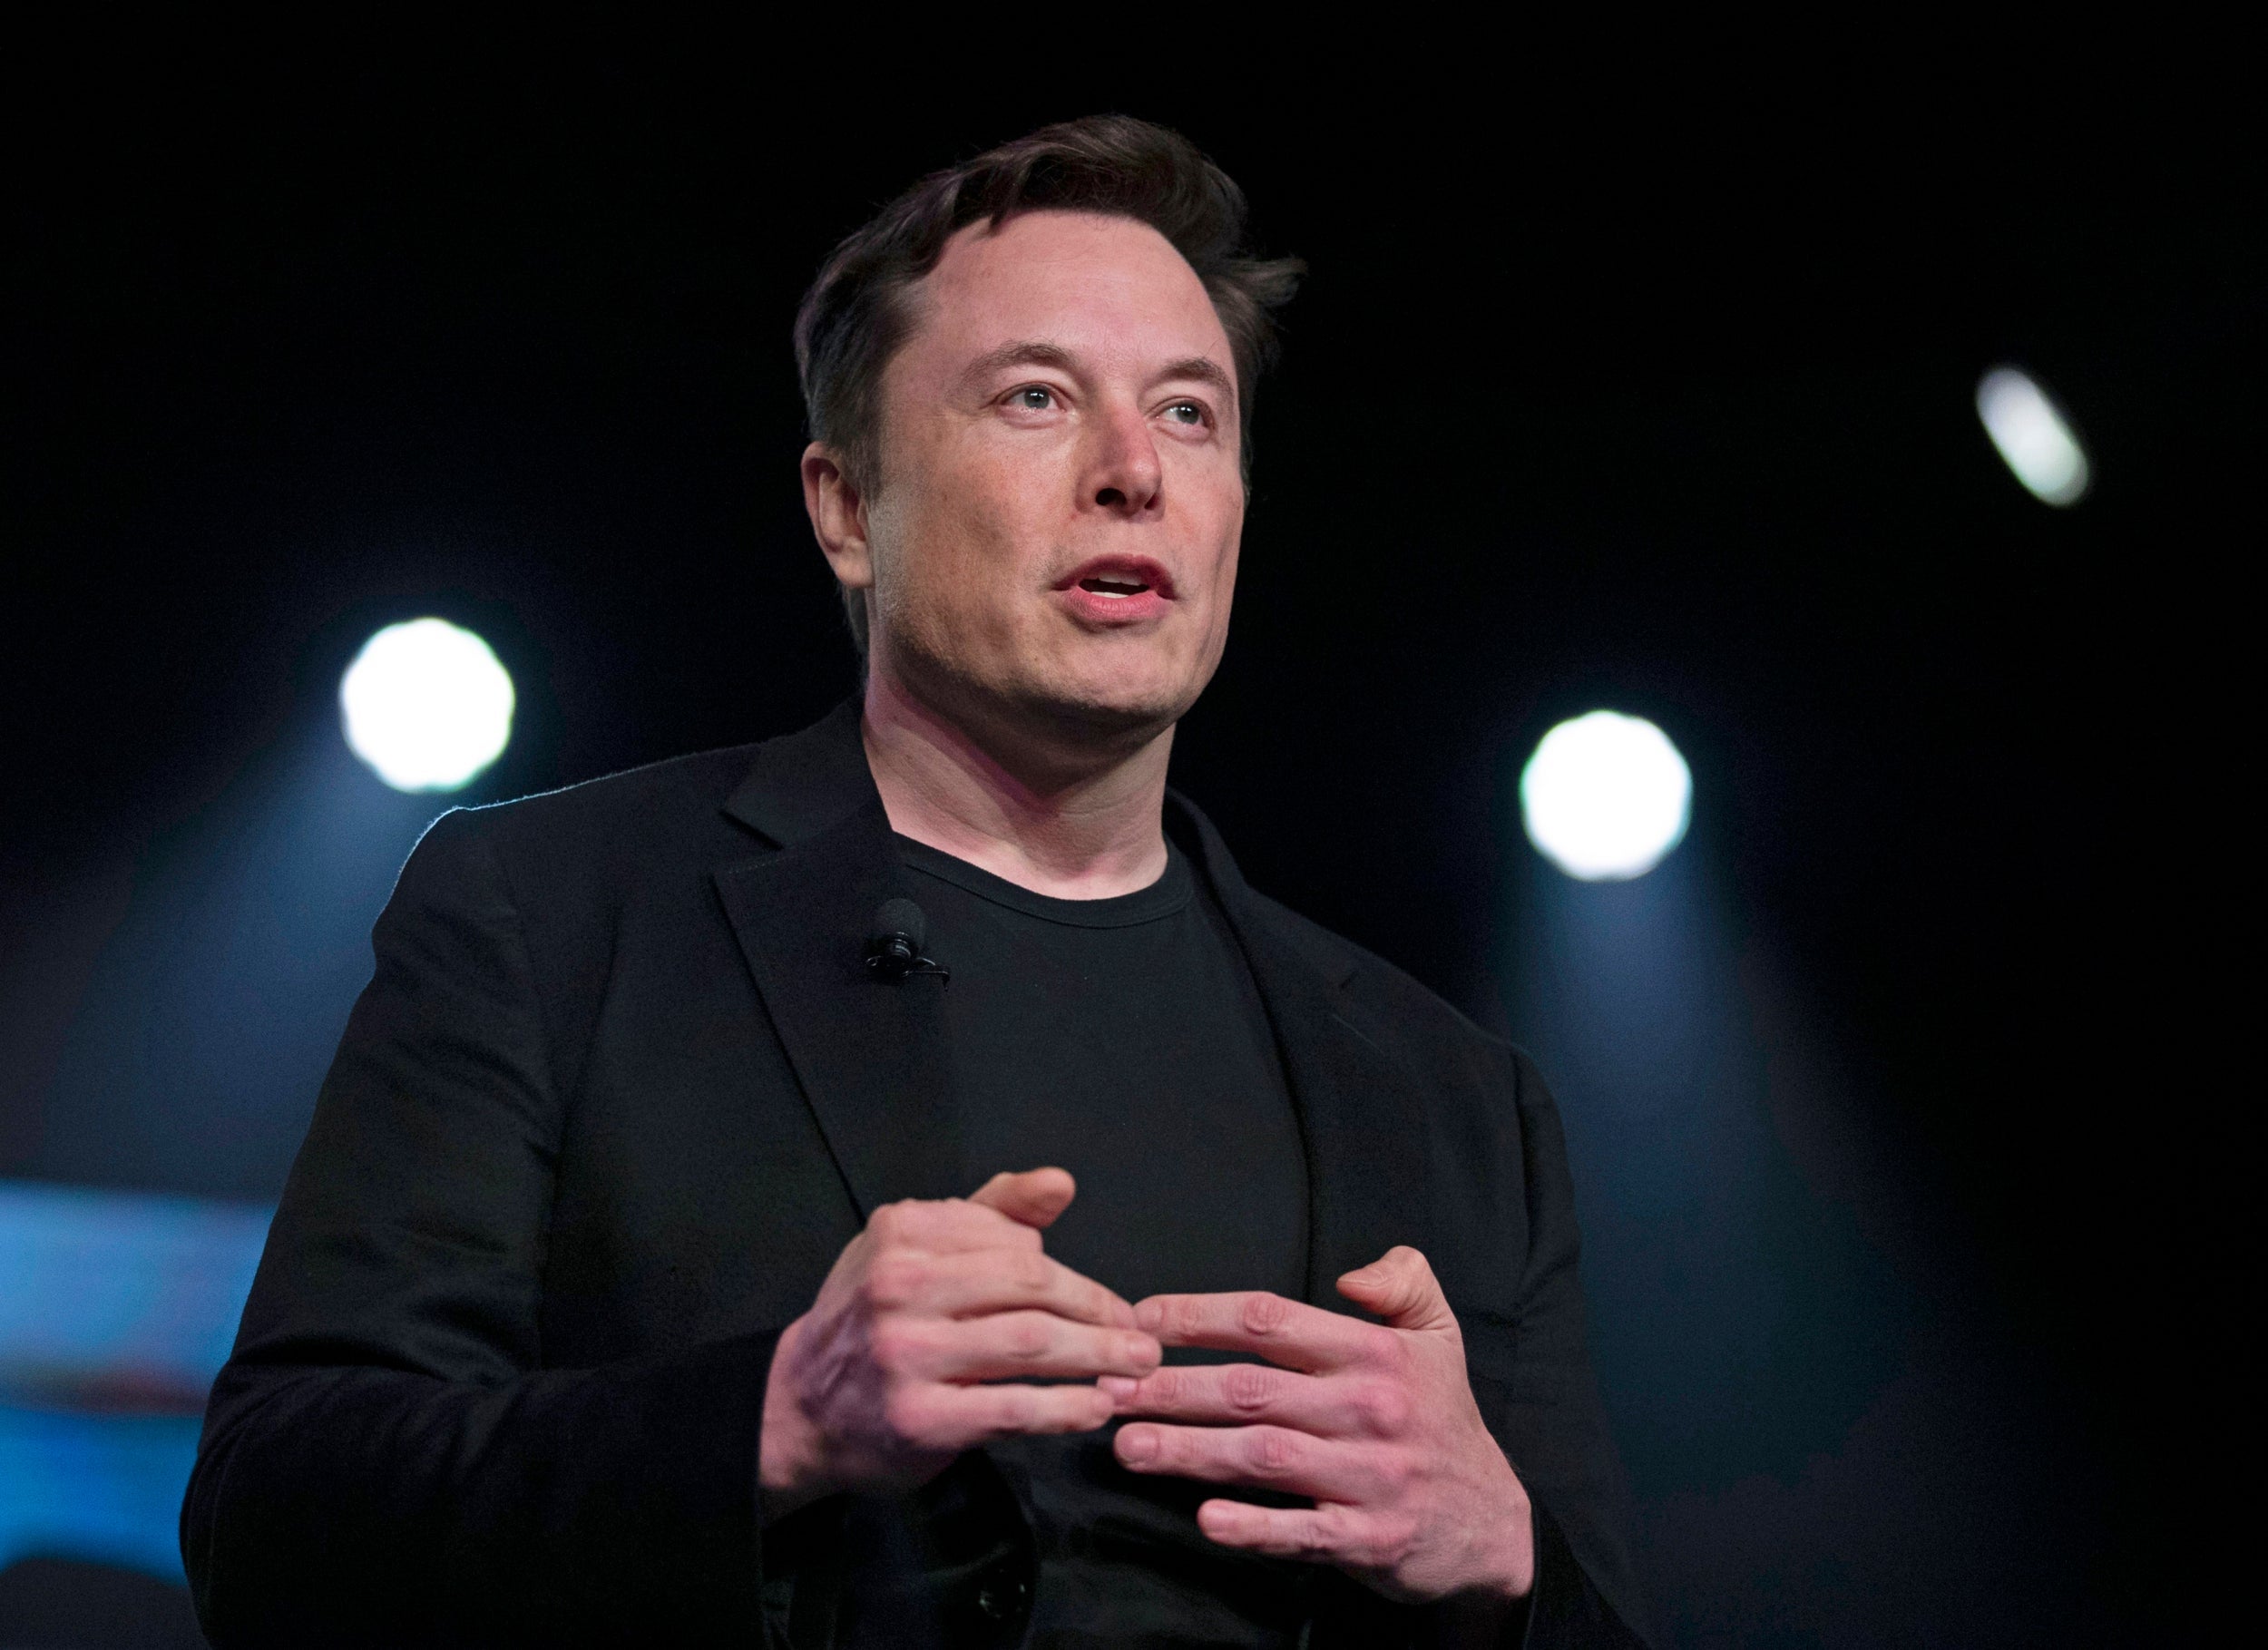 Tesla founder Elon Musk has been a vocal critic of short sellers